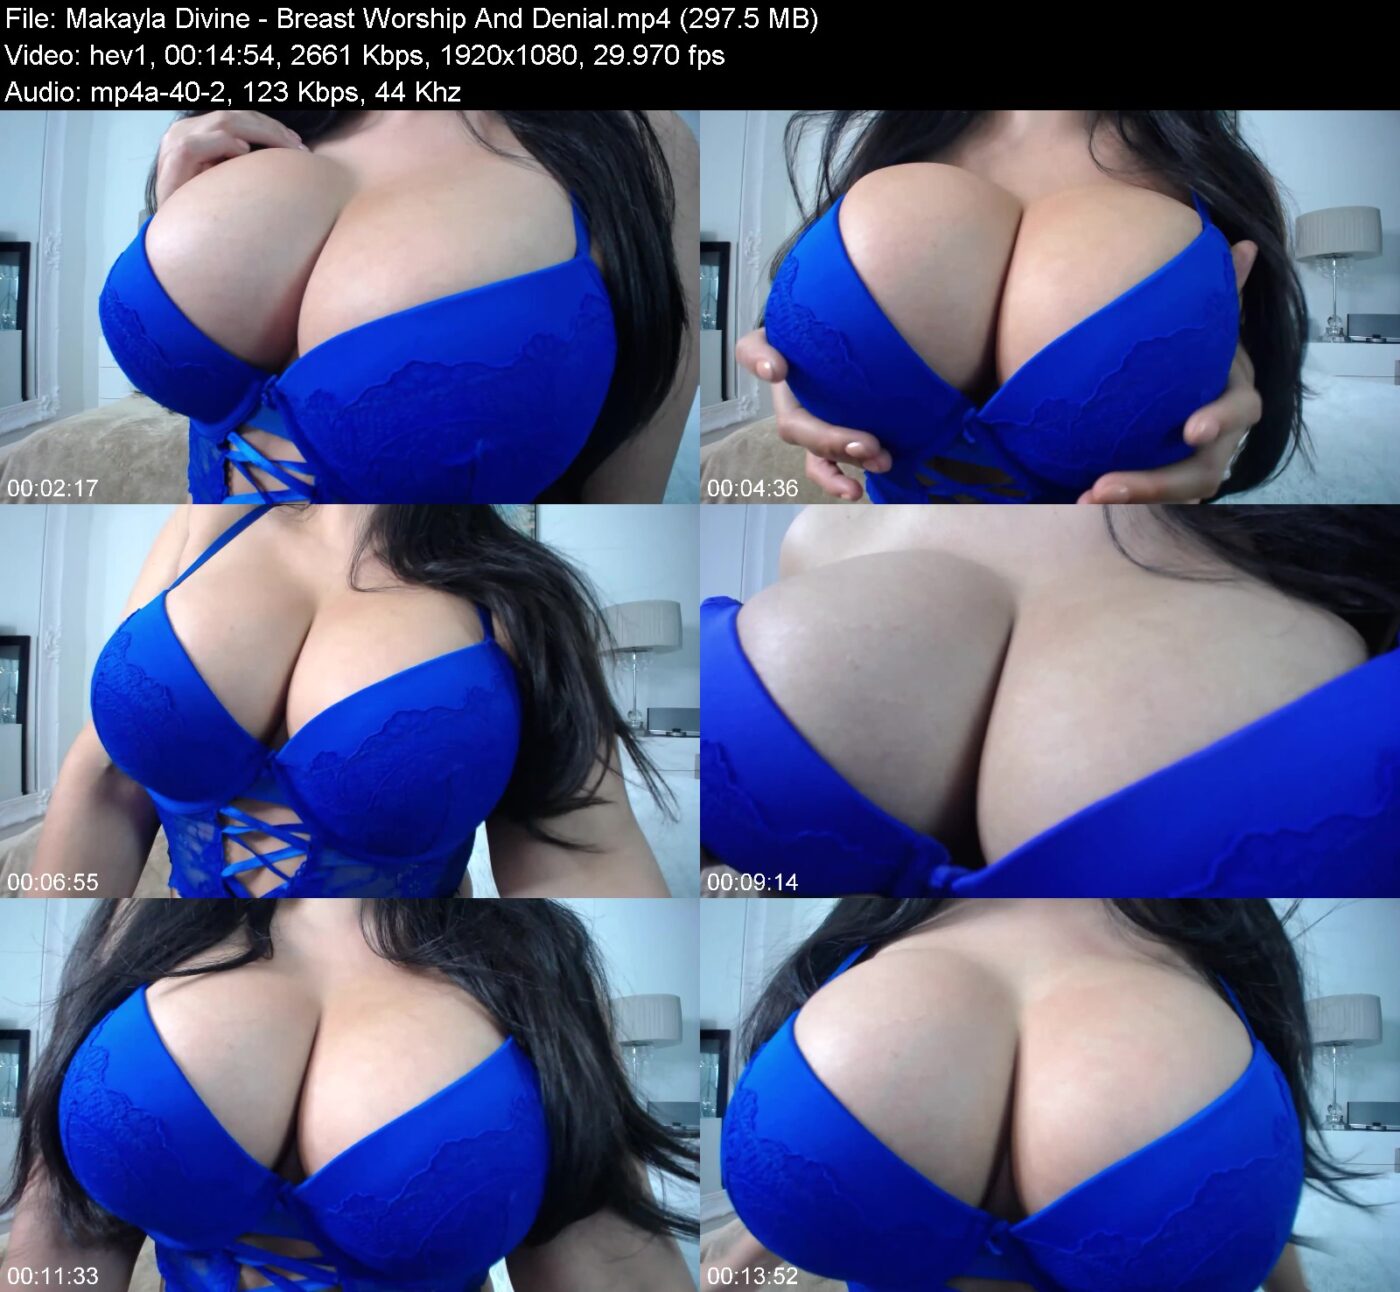 Actress: Makayla Divine. Title and Studio: Breast Worship And Denial